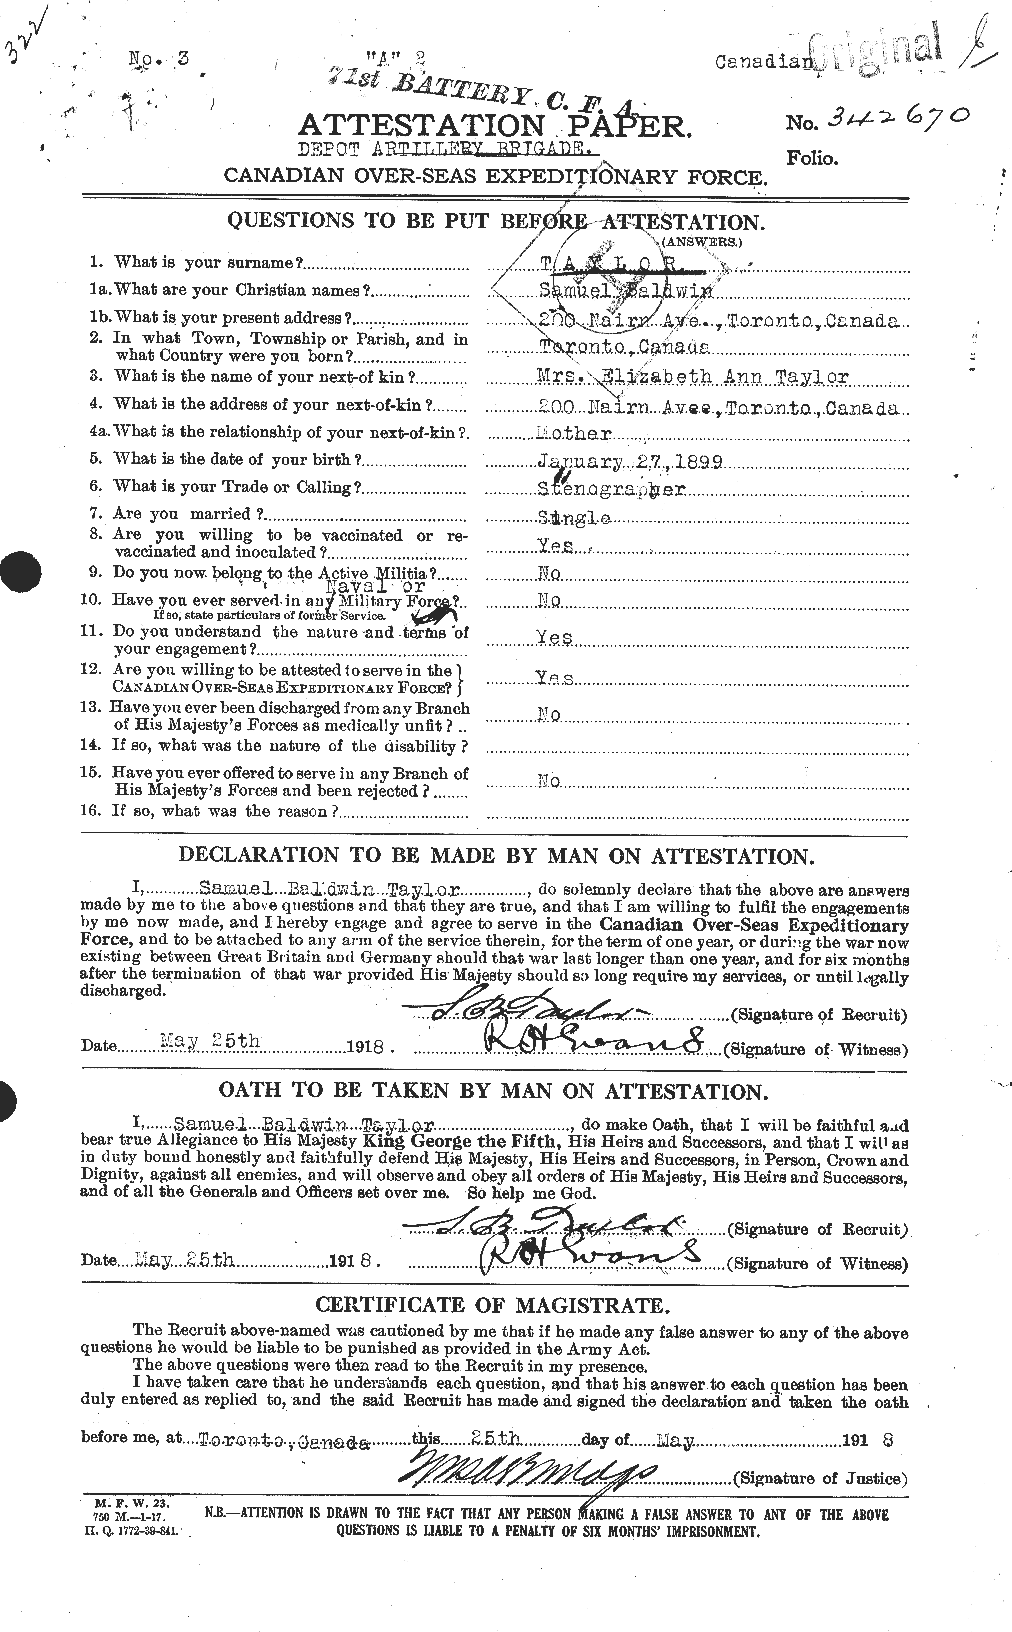 Personnel Records of the First World War - CEF 627875a